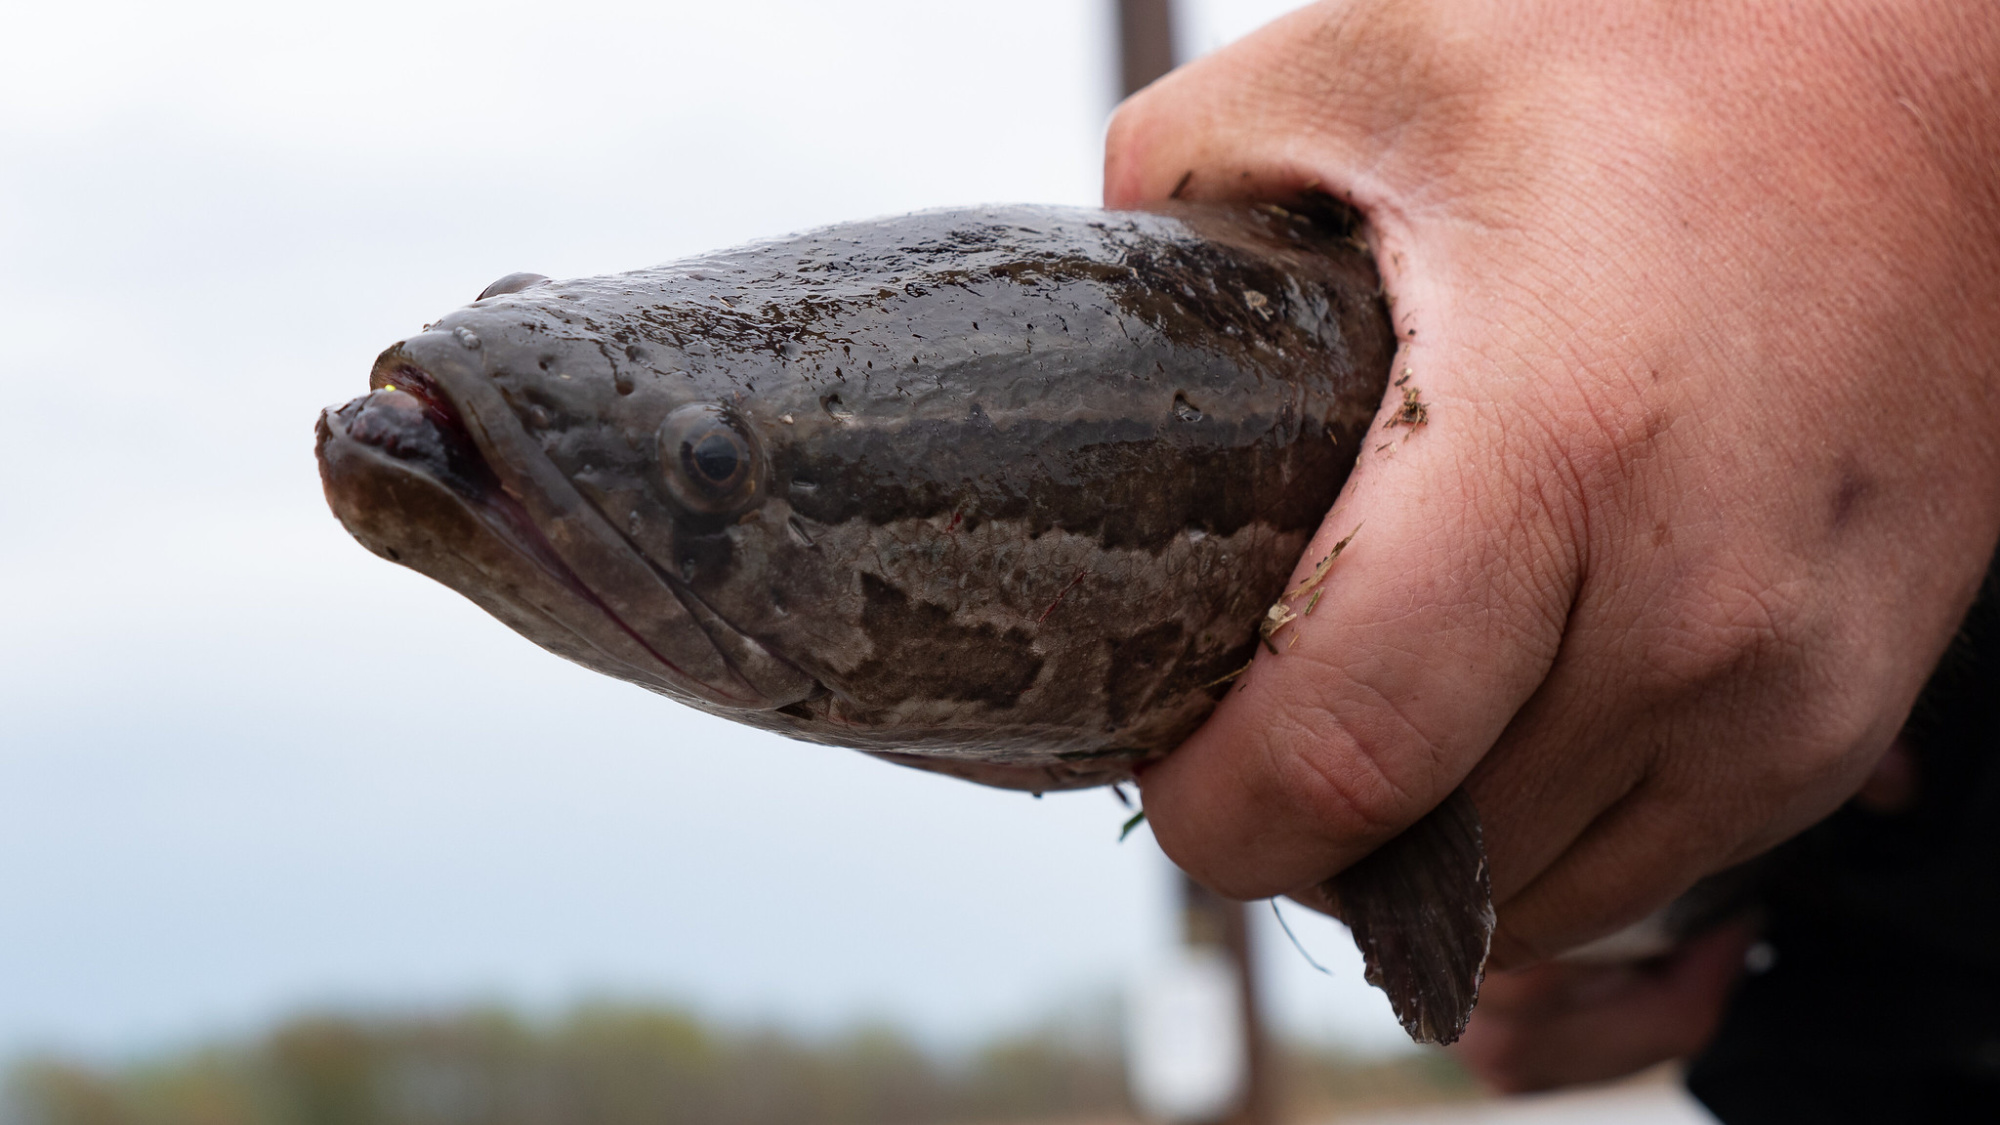 second northern snakehead caught in missouri